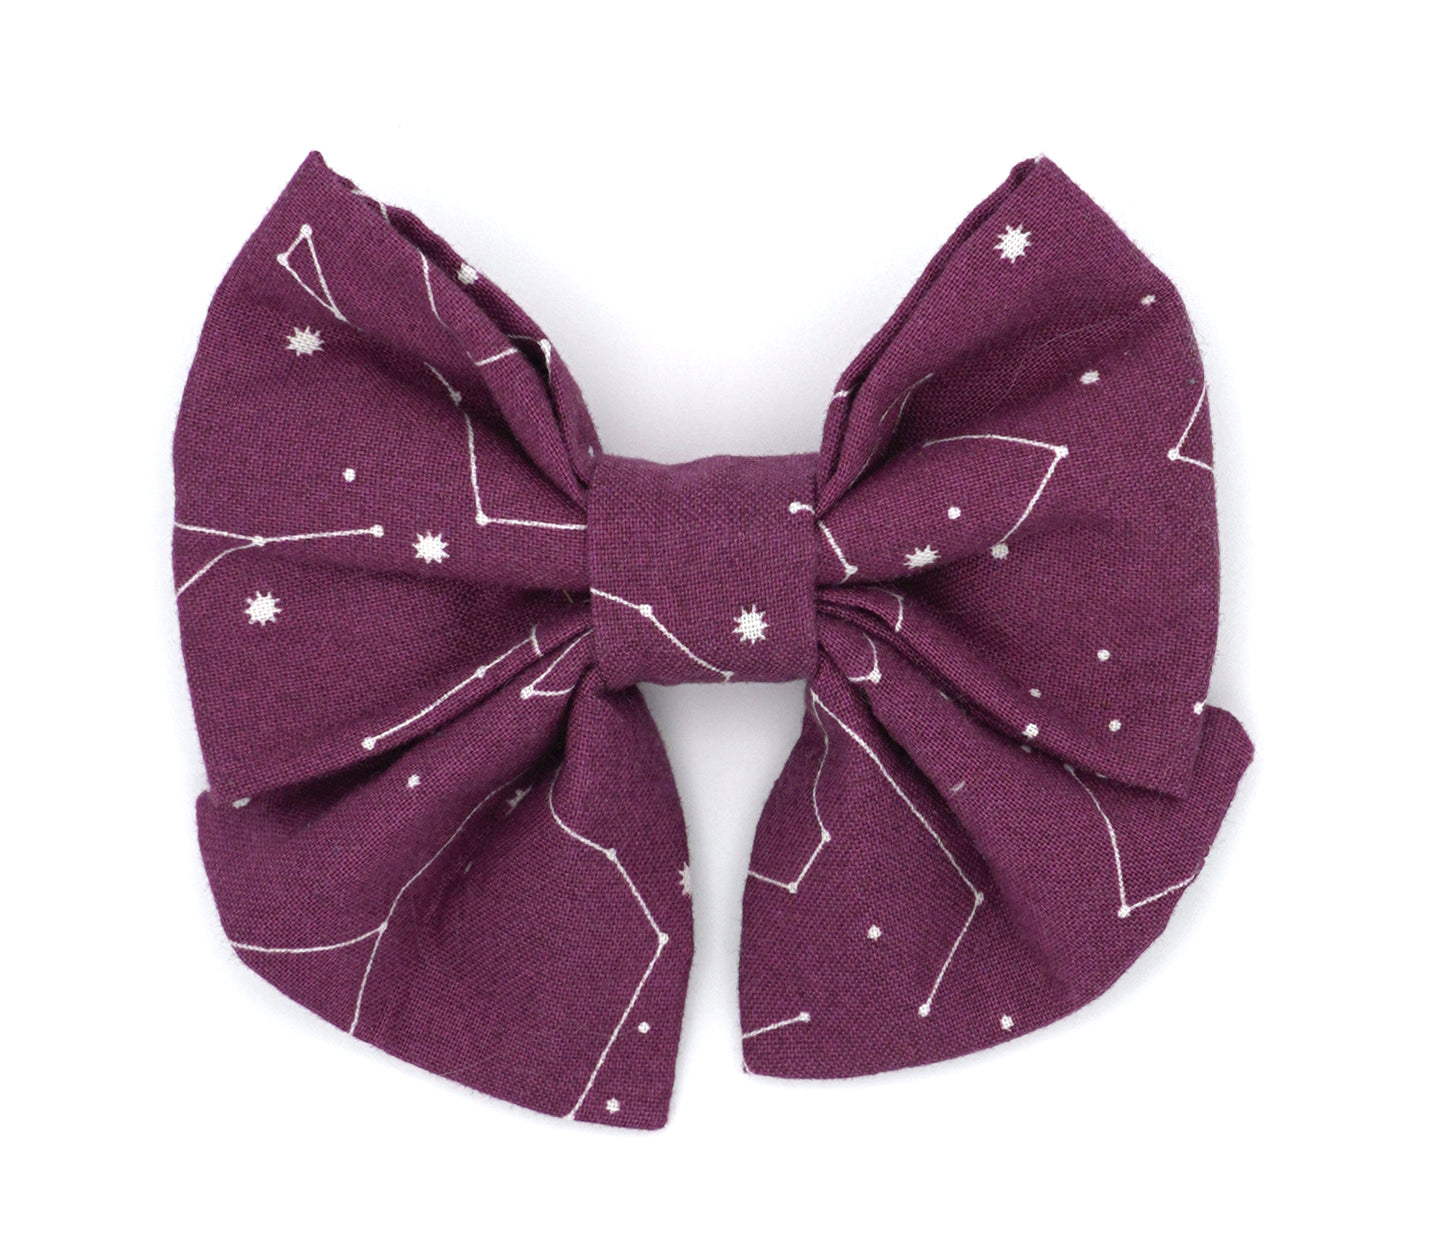 Handmade cotton bow tie with tails for dogs (or other pets). Elastic straps on back with snaps make it easy to add to collar, harness, or leash. Purple/wine color background with white constellations and starbursts